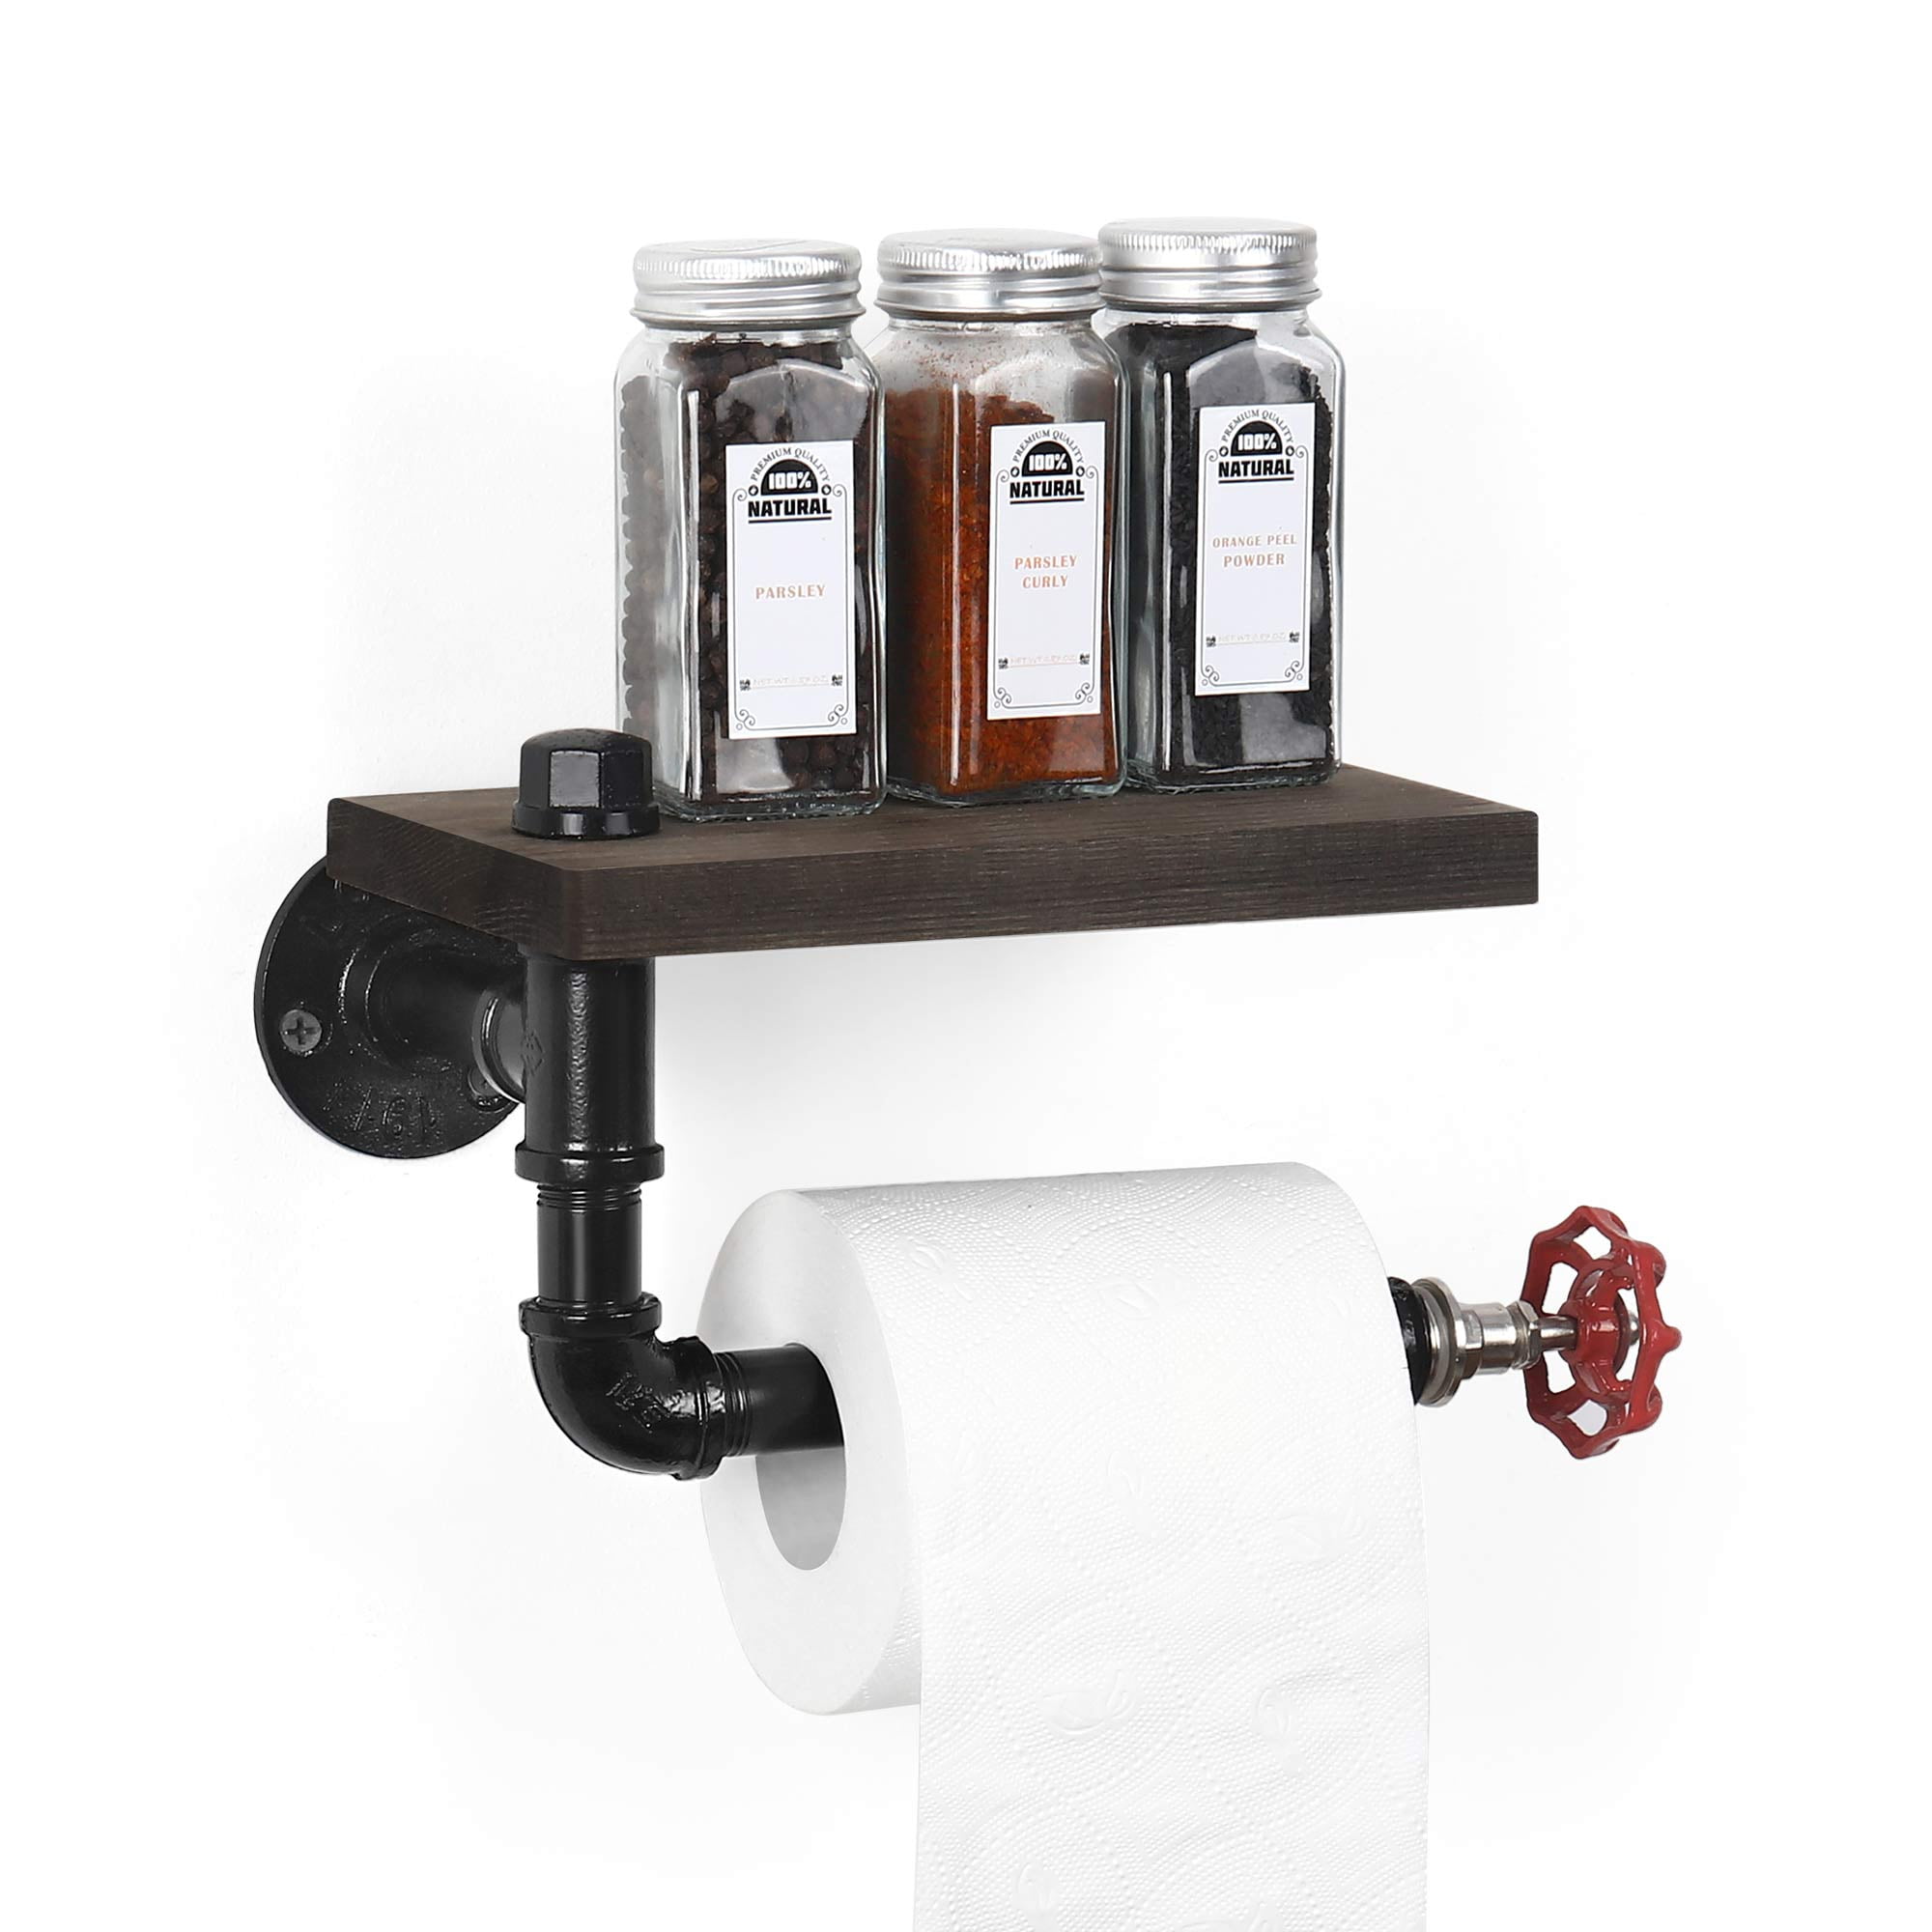 Wall Mounted Industrial Dual Toilet Paper Holder with Storage Shelf for Bathroom, Black